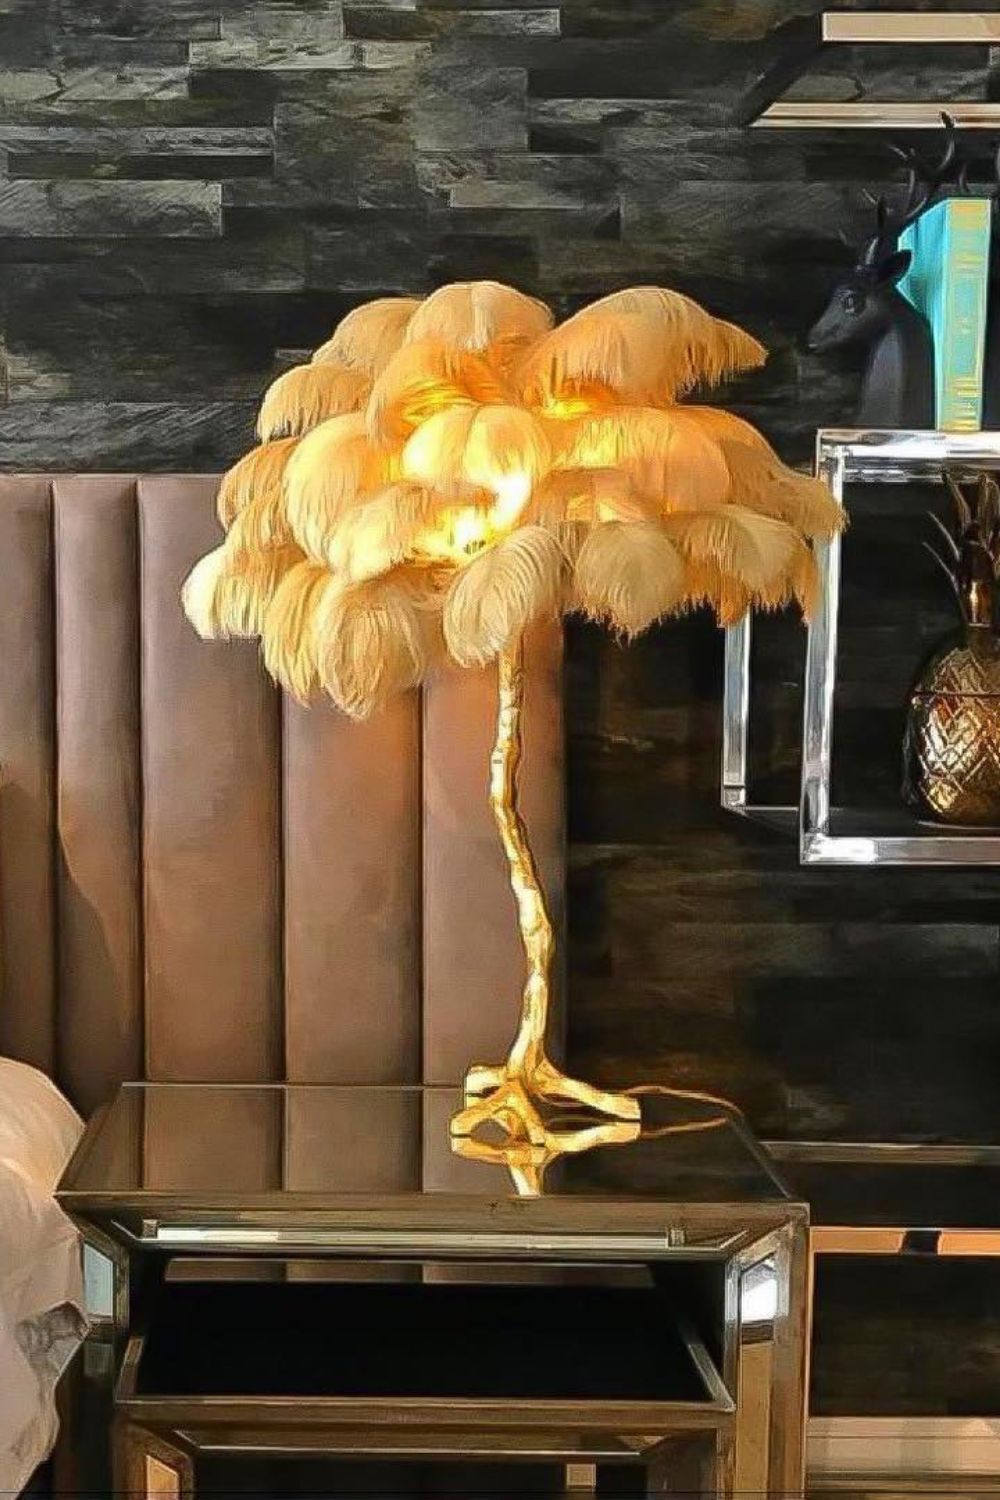 Ostrich Feather Table Lamp - SamuLighting